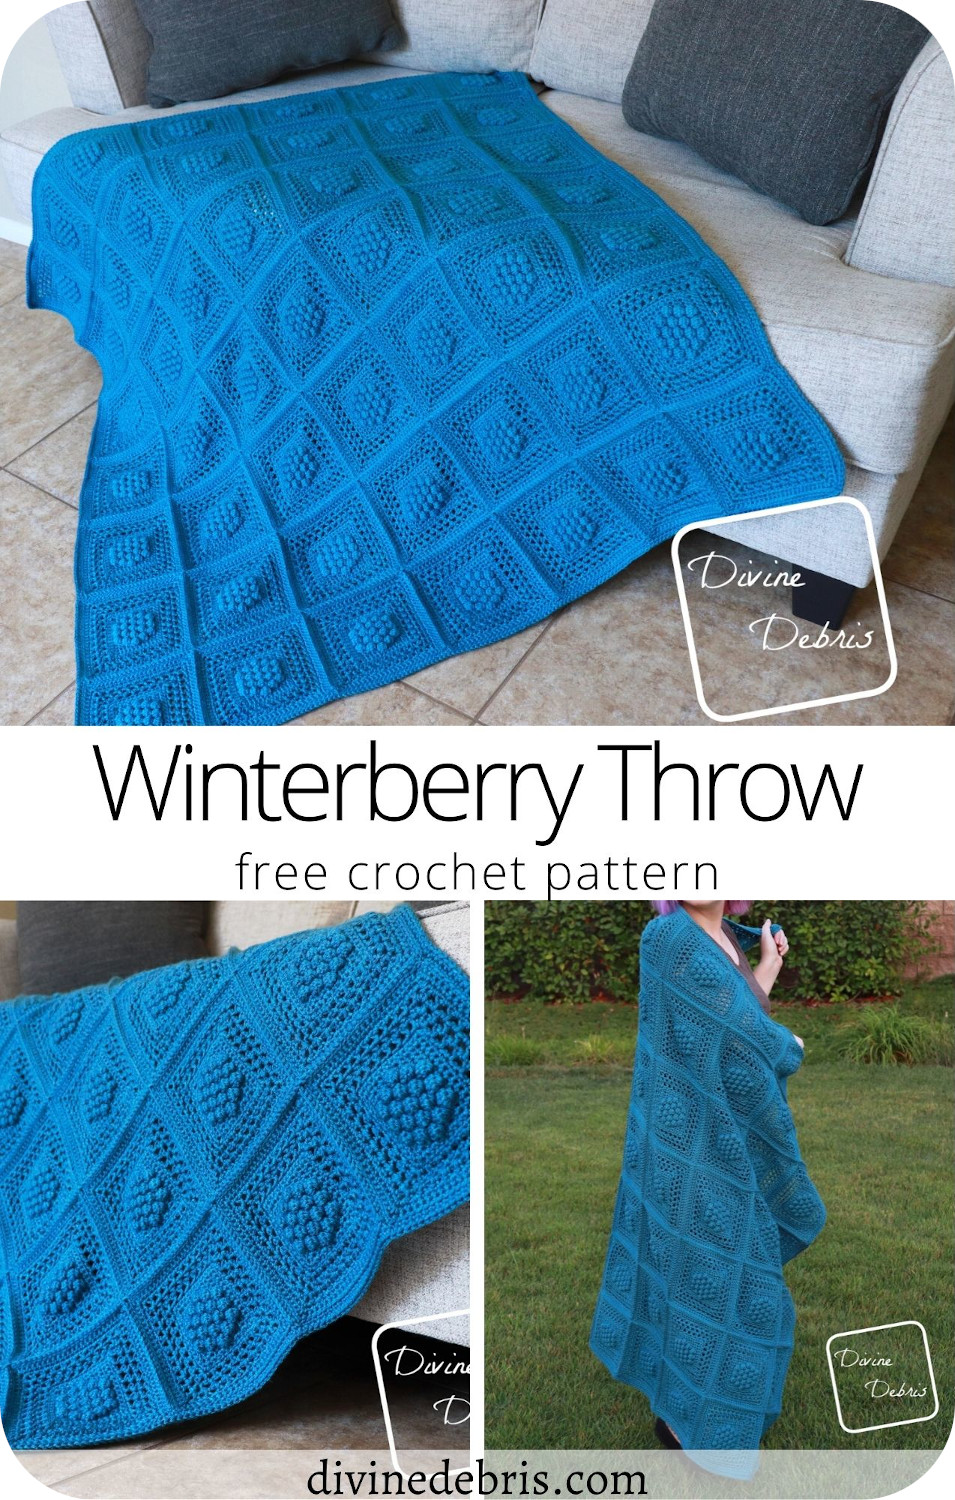 Learn to make the Winterberry Throw, a textured and fun blanket, from a free and easy crochet pattern by DivineDebris.com